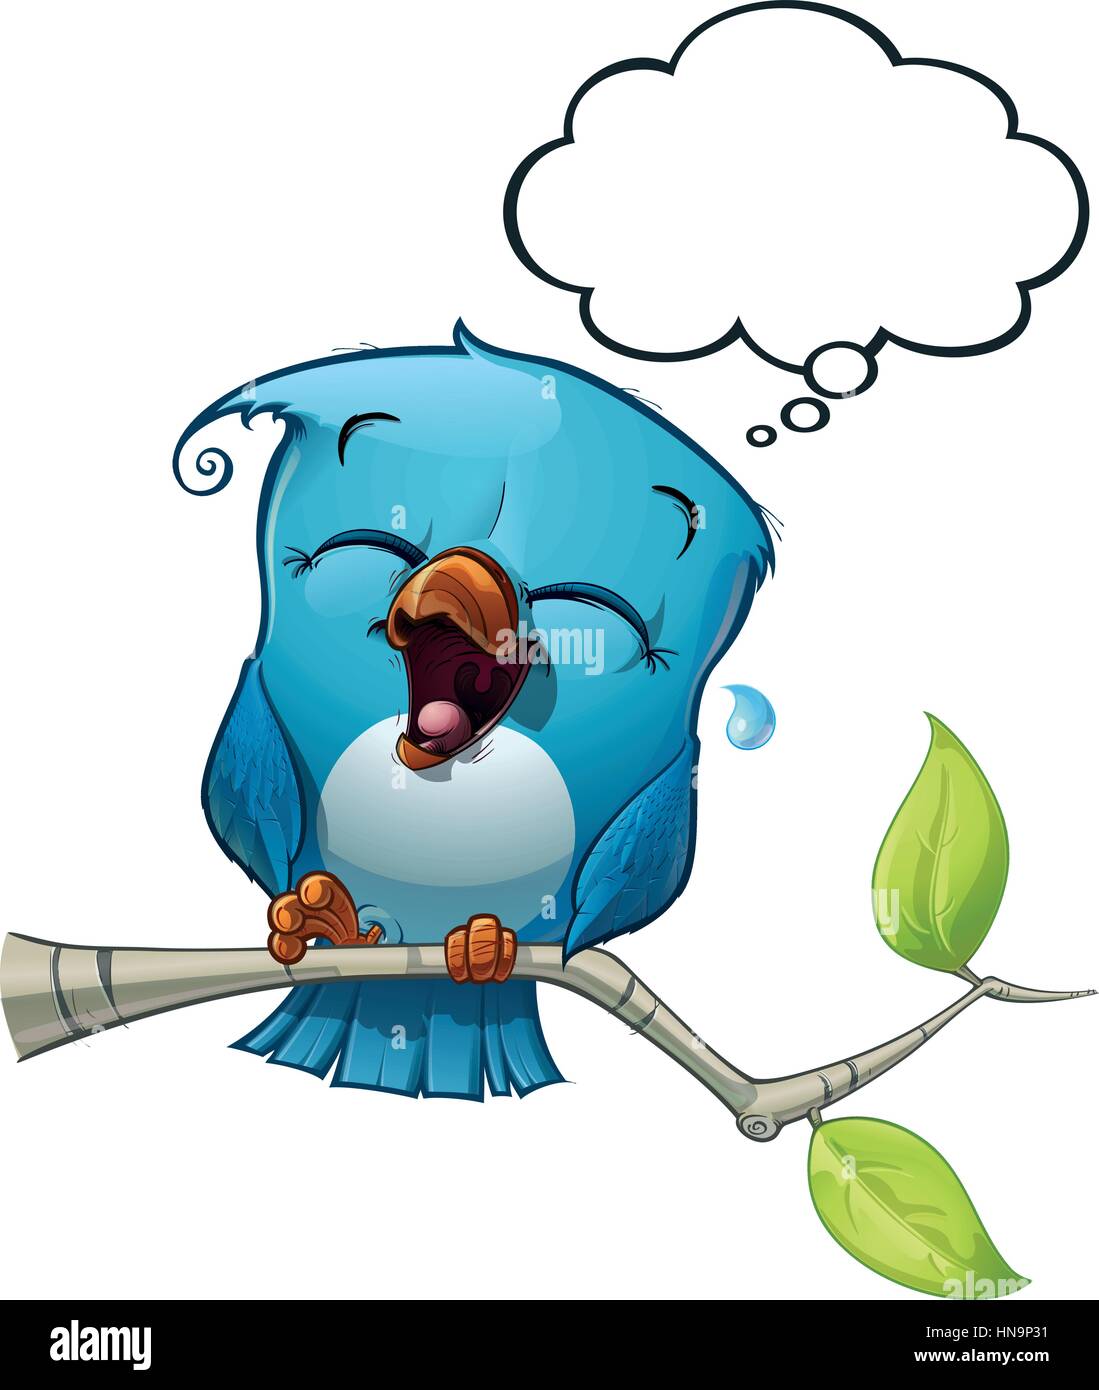 A blue bird communicates with style comments or opinions to the world! Stock Vector